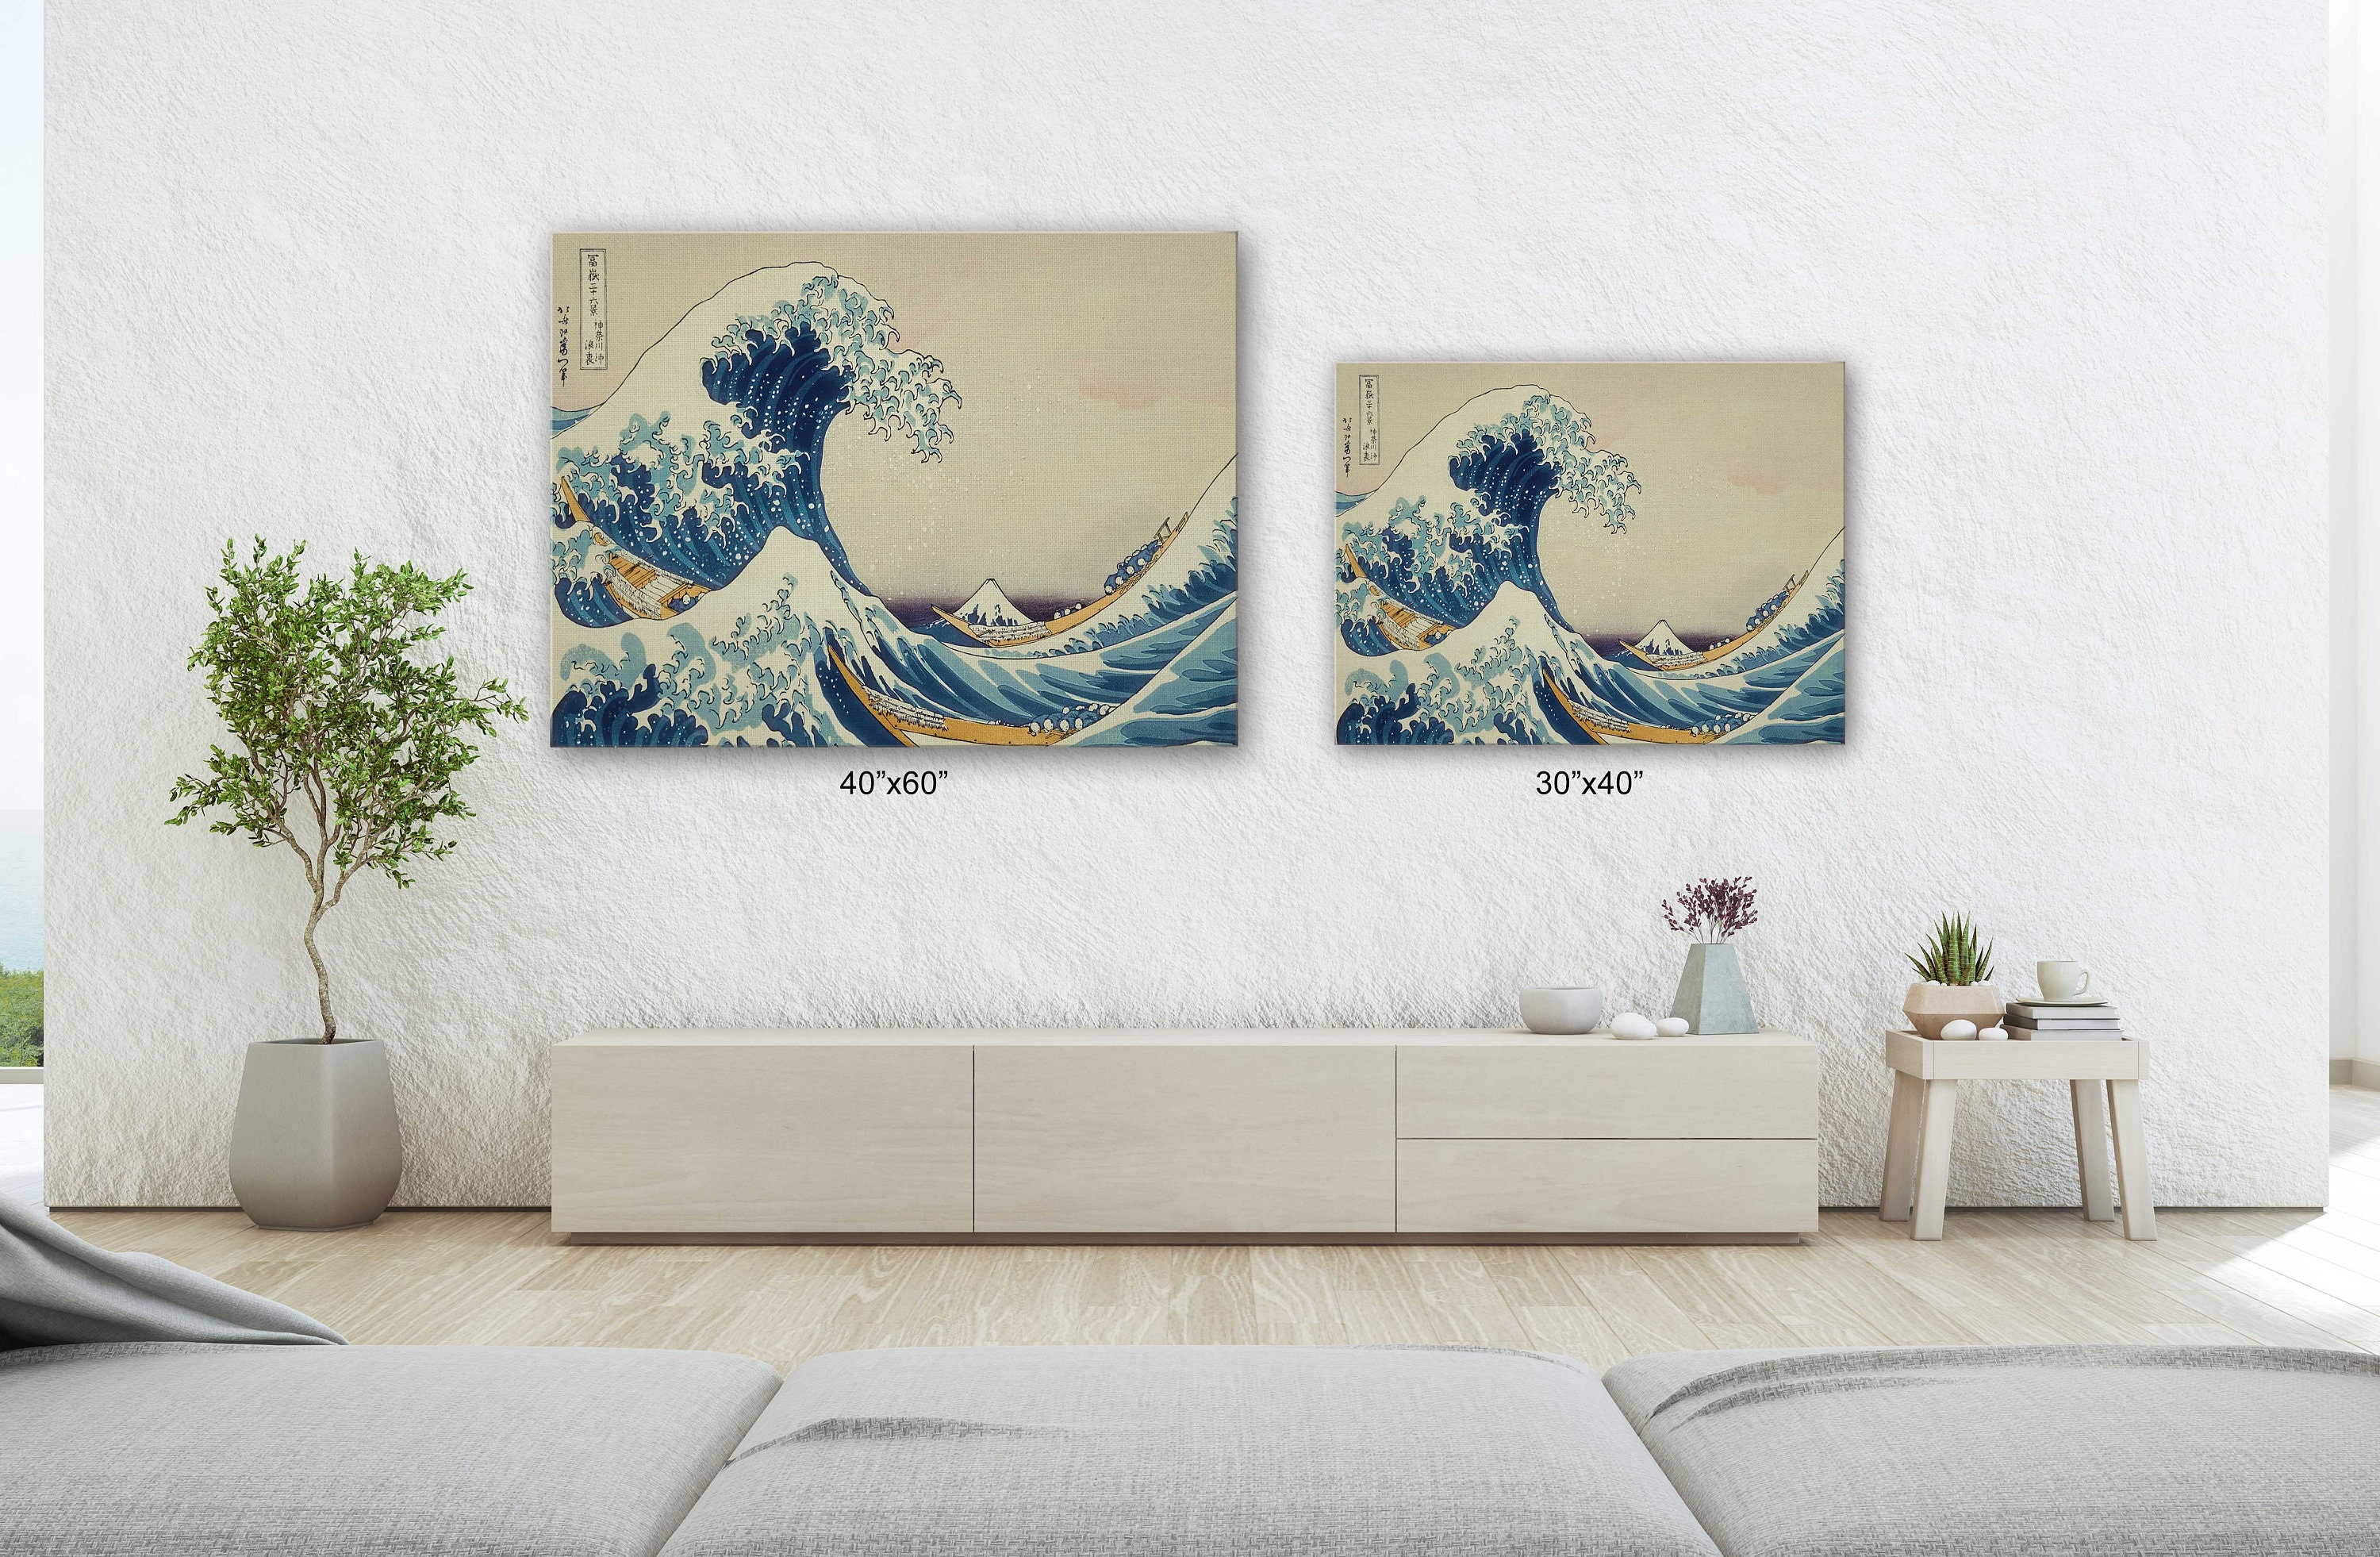 Classic Art Canvas Poster-The Great Wave Off Kanagawa Art | Etsy